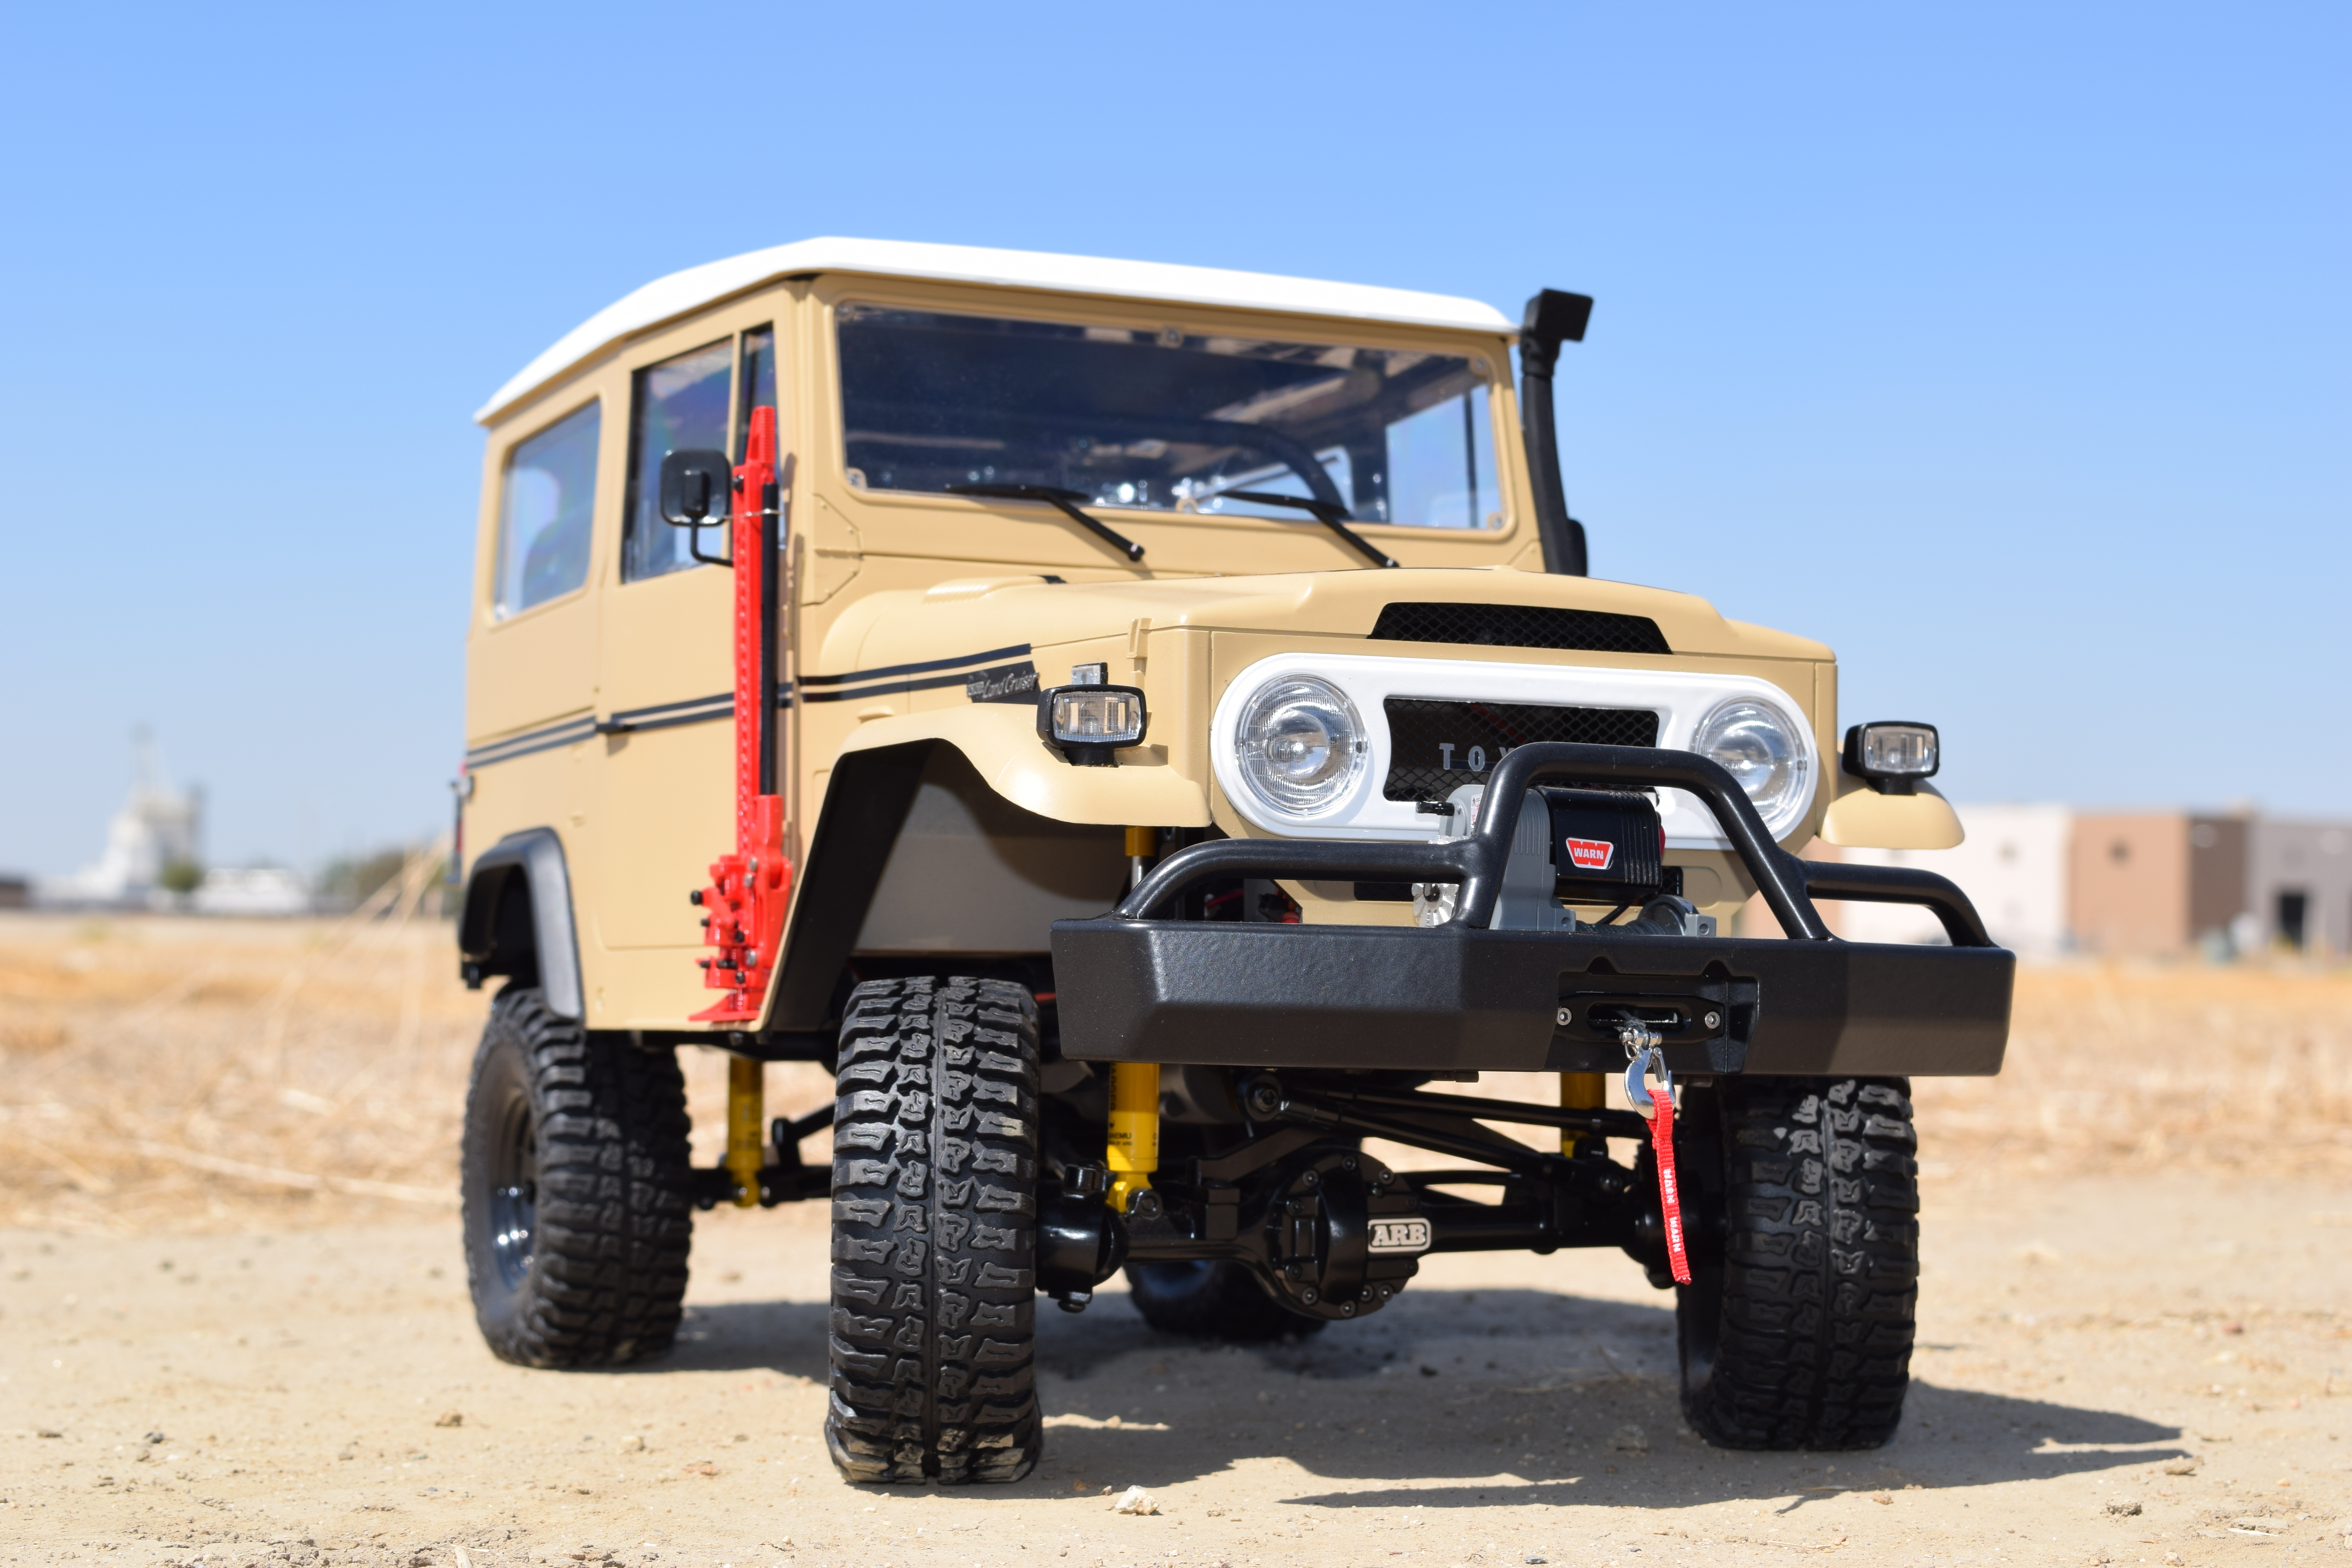 Take a Look at Our Exclusive Custom Built Cruiser for ARB!!